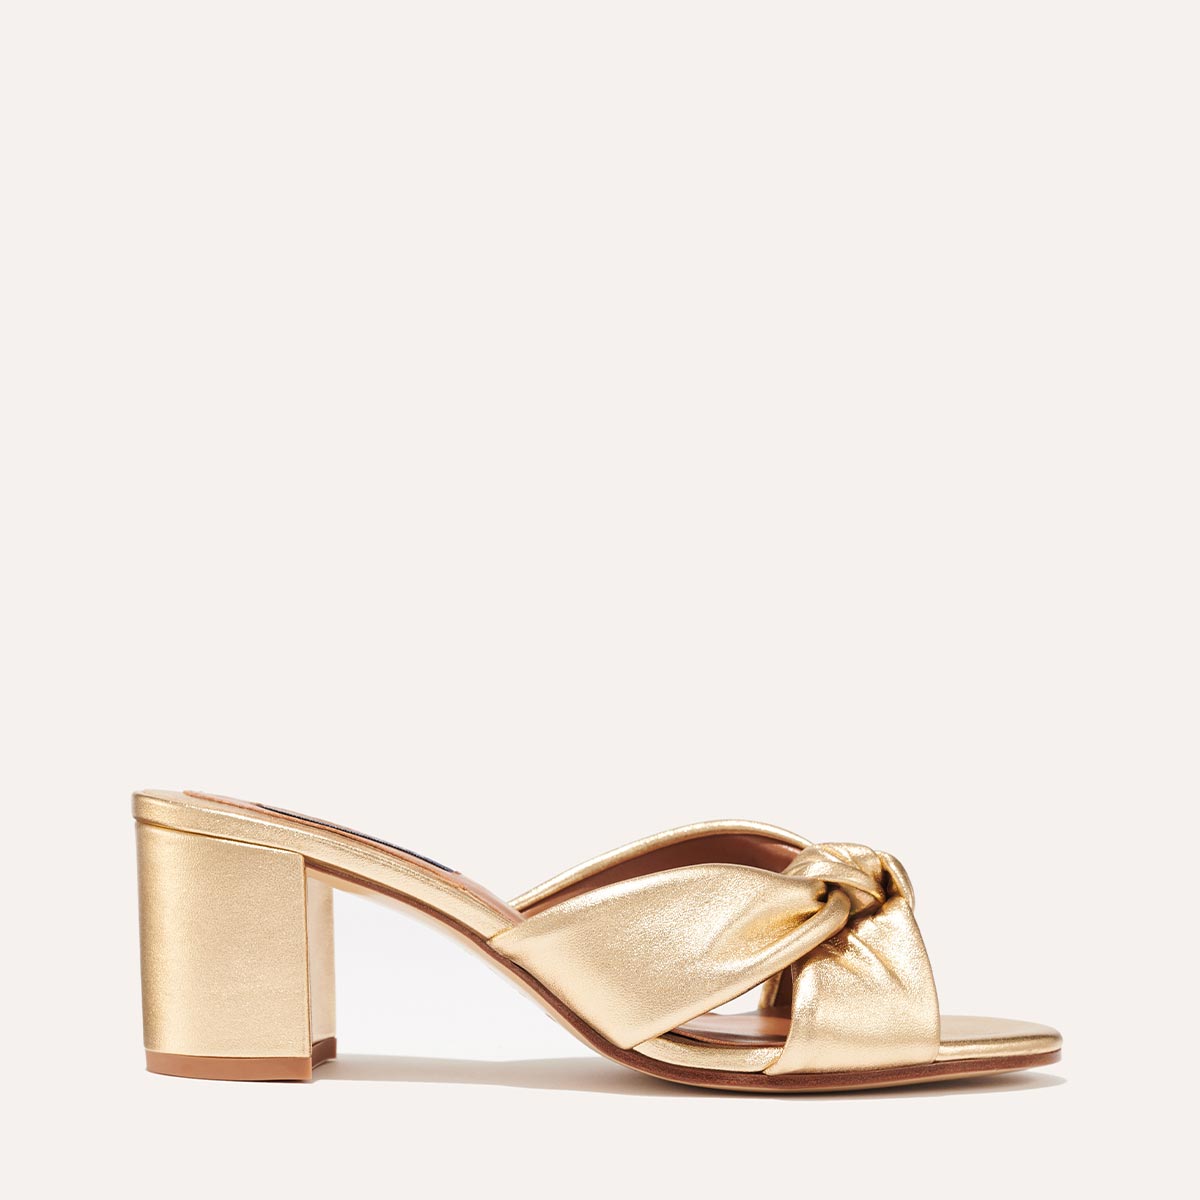 Margaux's Carmine Mule in gold nappa leather with a knot detail and comfortable block heel